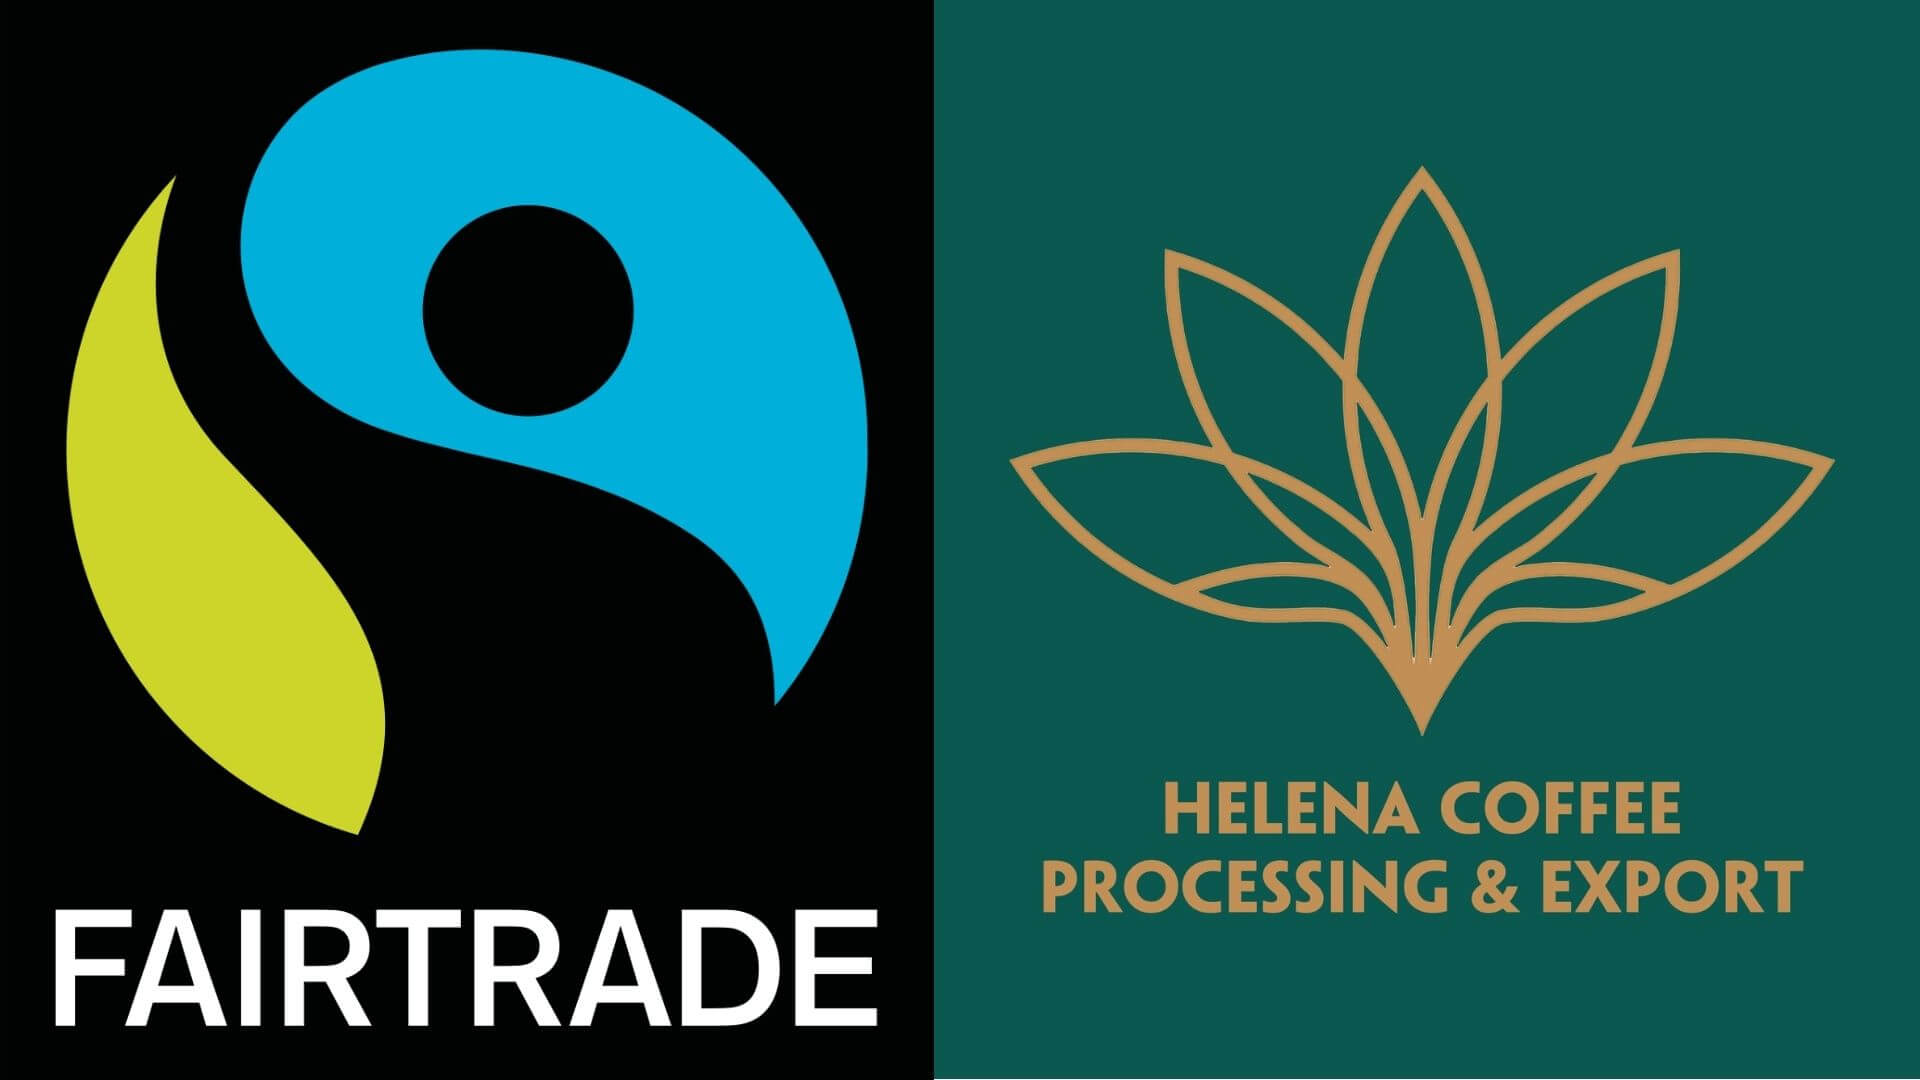 Helena - One Of The Best Fair Trade Coffee Suppliers